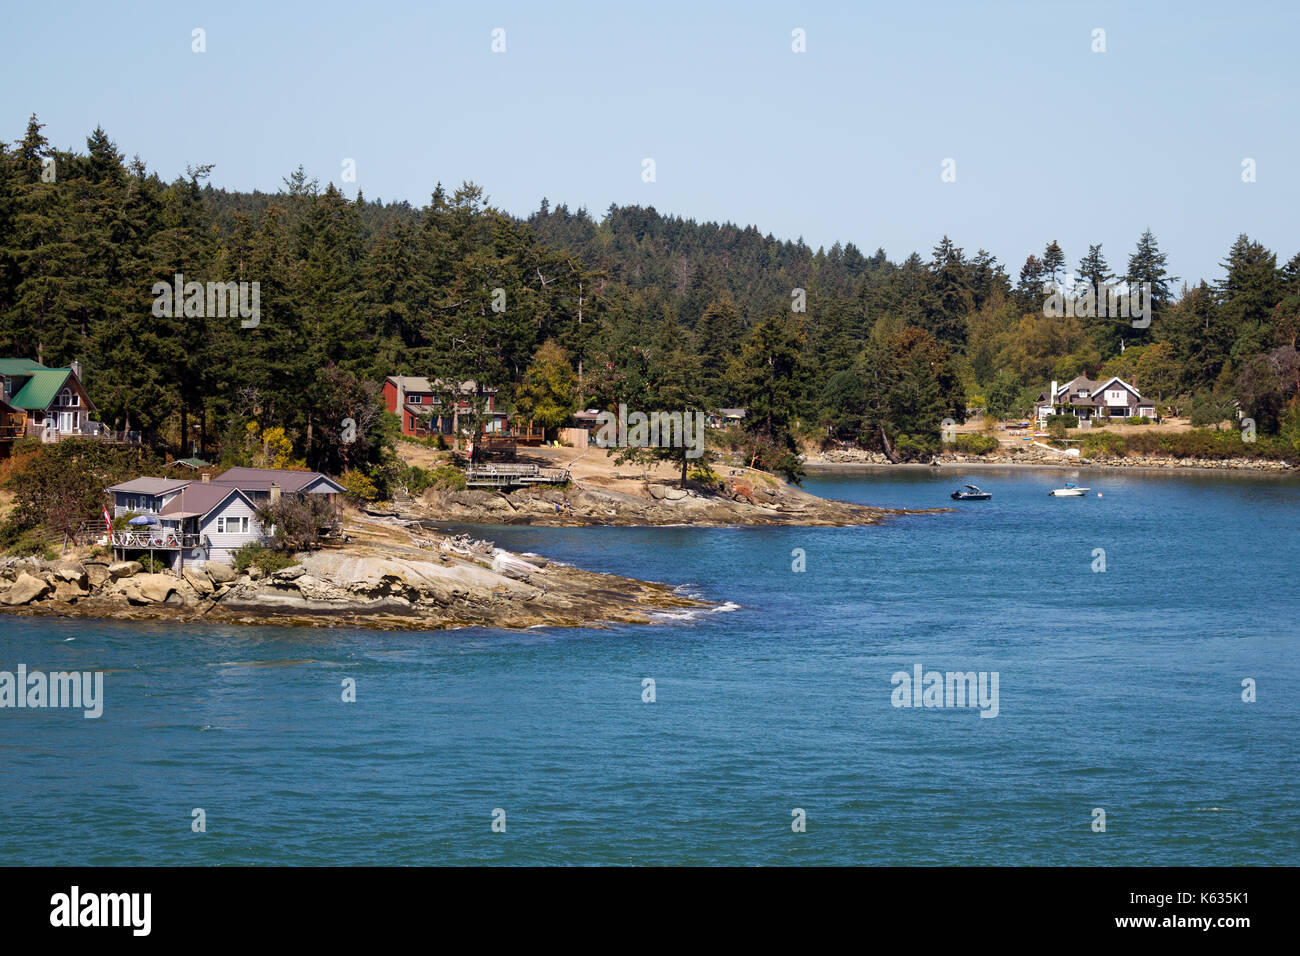 Houses in a small bay on the Gulf Islands at Vancouver Island, British Columbia, Canada. Stock Photo